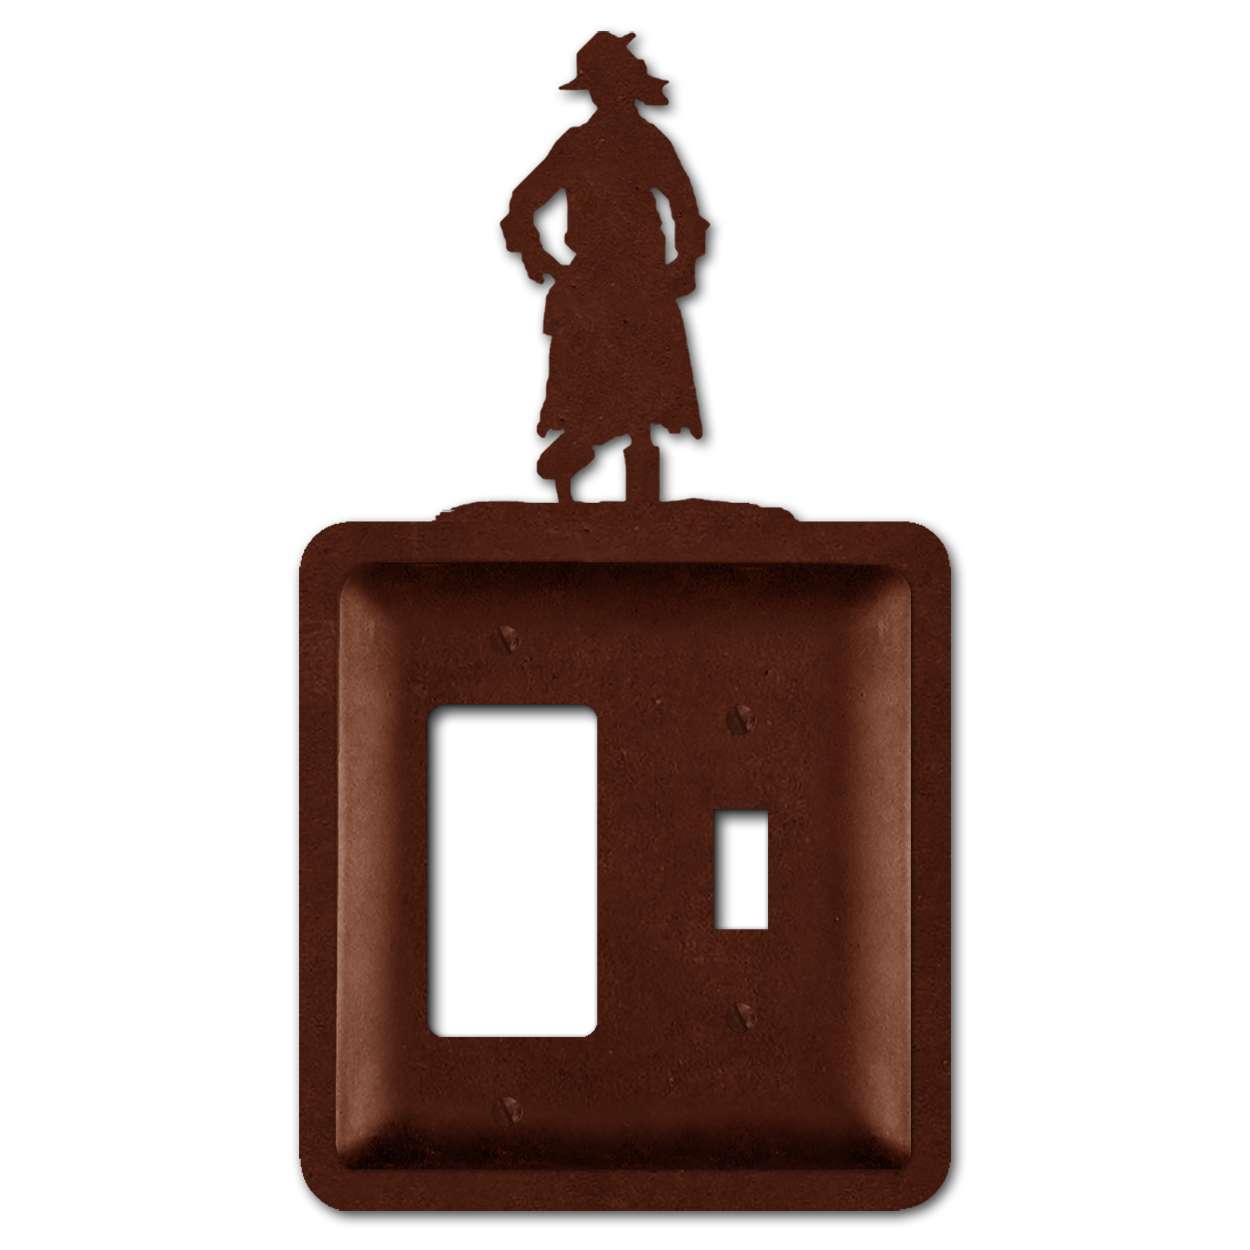 182097RT - Rust Brown 2-Part Metal Wall Plate - Cowgirl - GFI with Standard Swtch